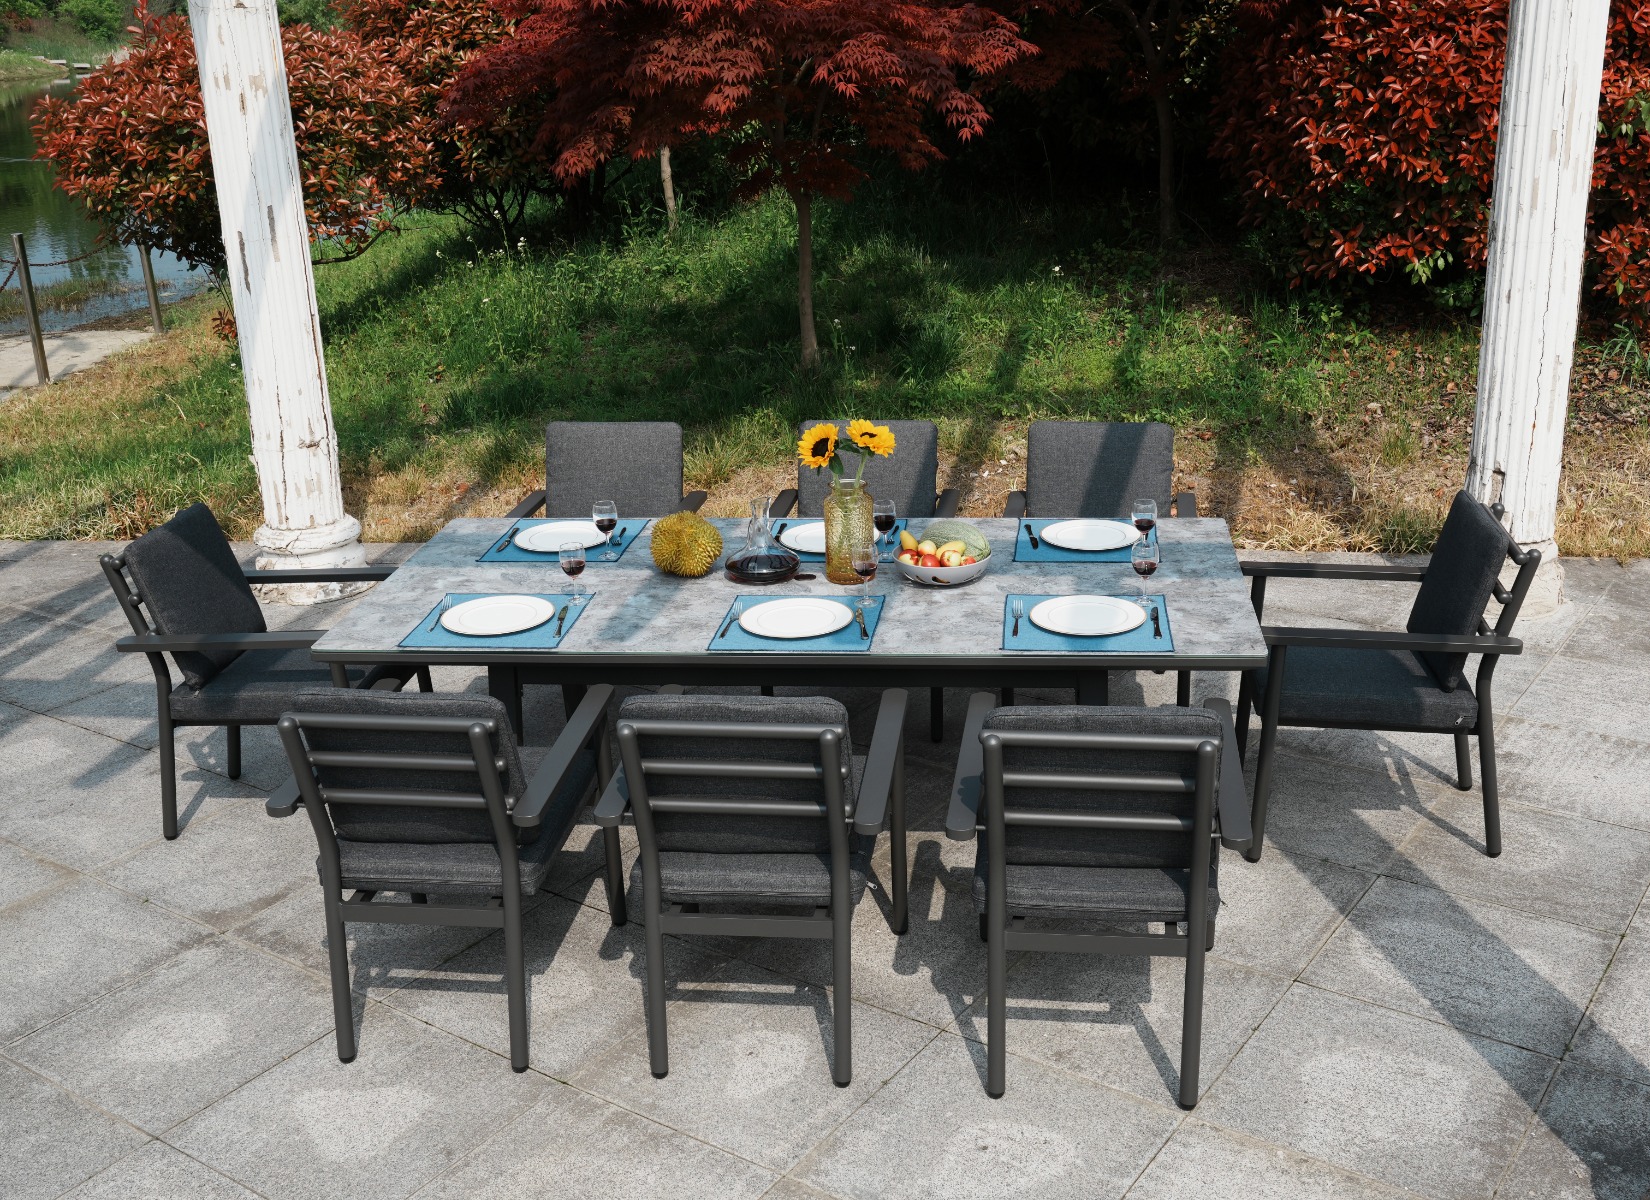 Deluxe Aluminium 8 Seat Dining Set with Patterned Table Top